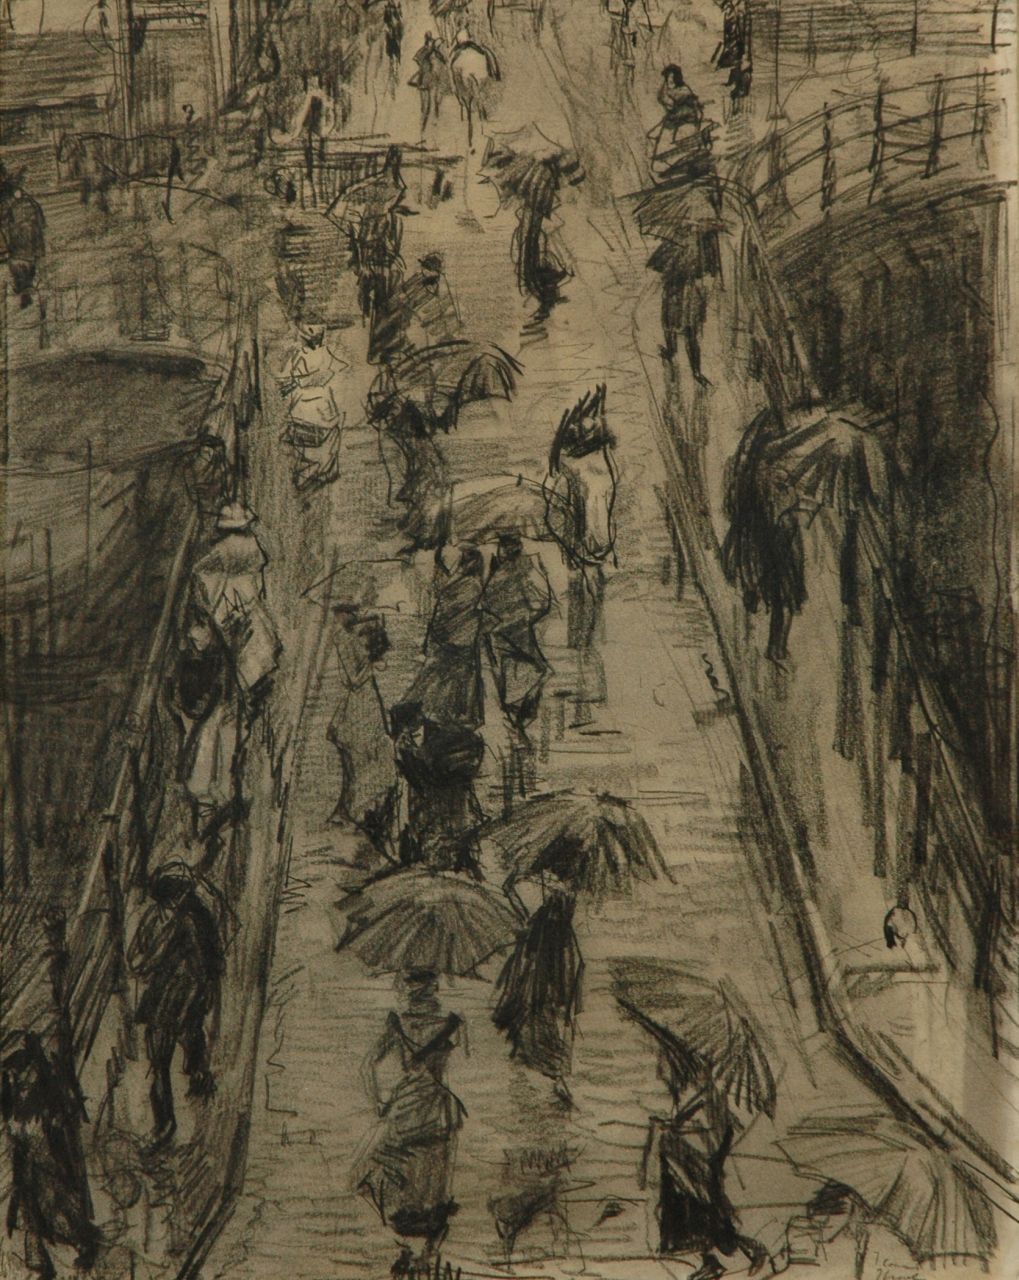 Israels I.L.  | 'Isaac' Lazarus Israels, Through the Rain; the Leliegracht in Amsterdam, charcoal and chalk on paper 62.0 x 47.5 cm, signed l.r. en verso and Executed ca. 1890-1894